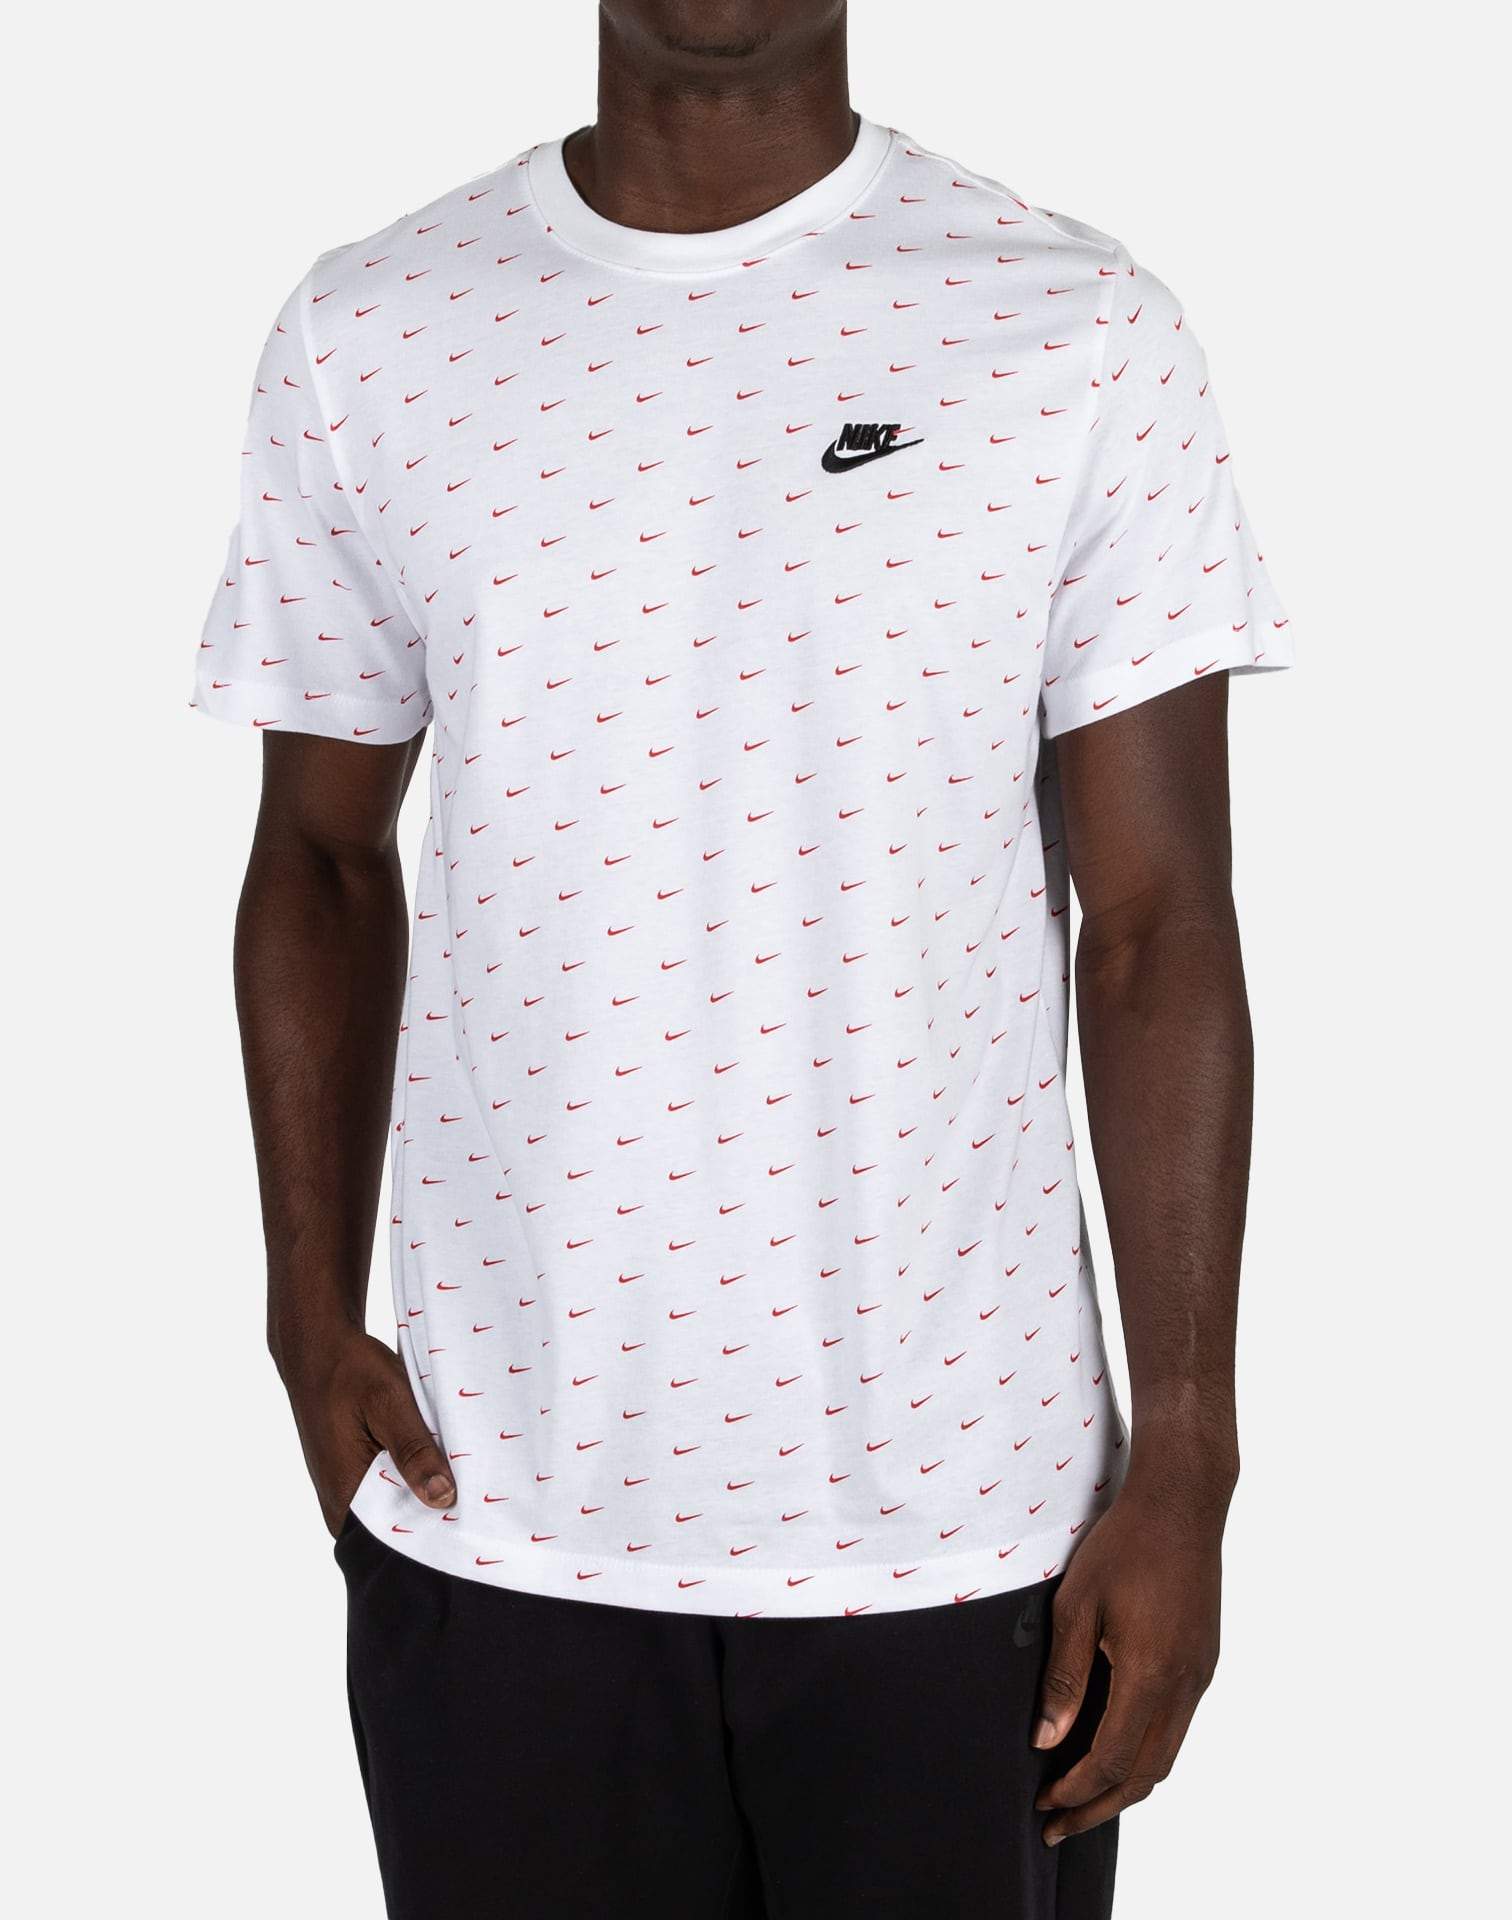 Buy > nike swoosh all over t shirt > in stock